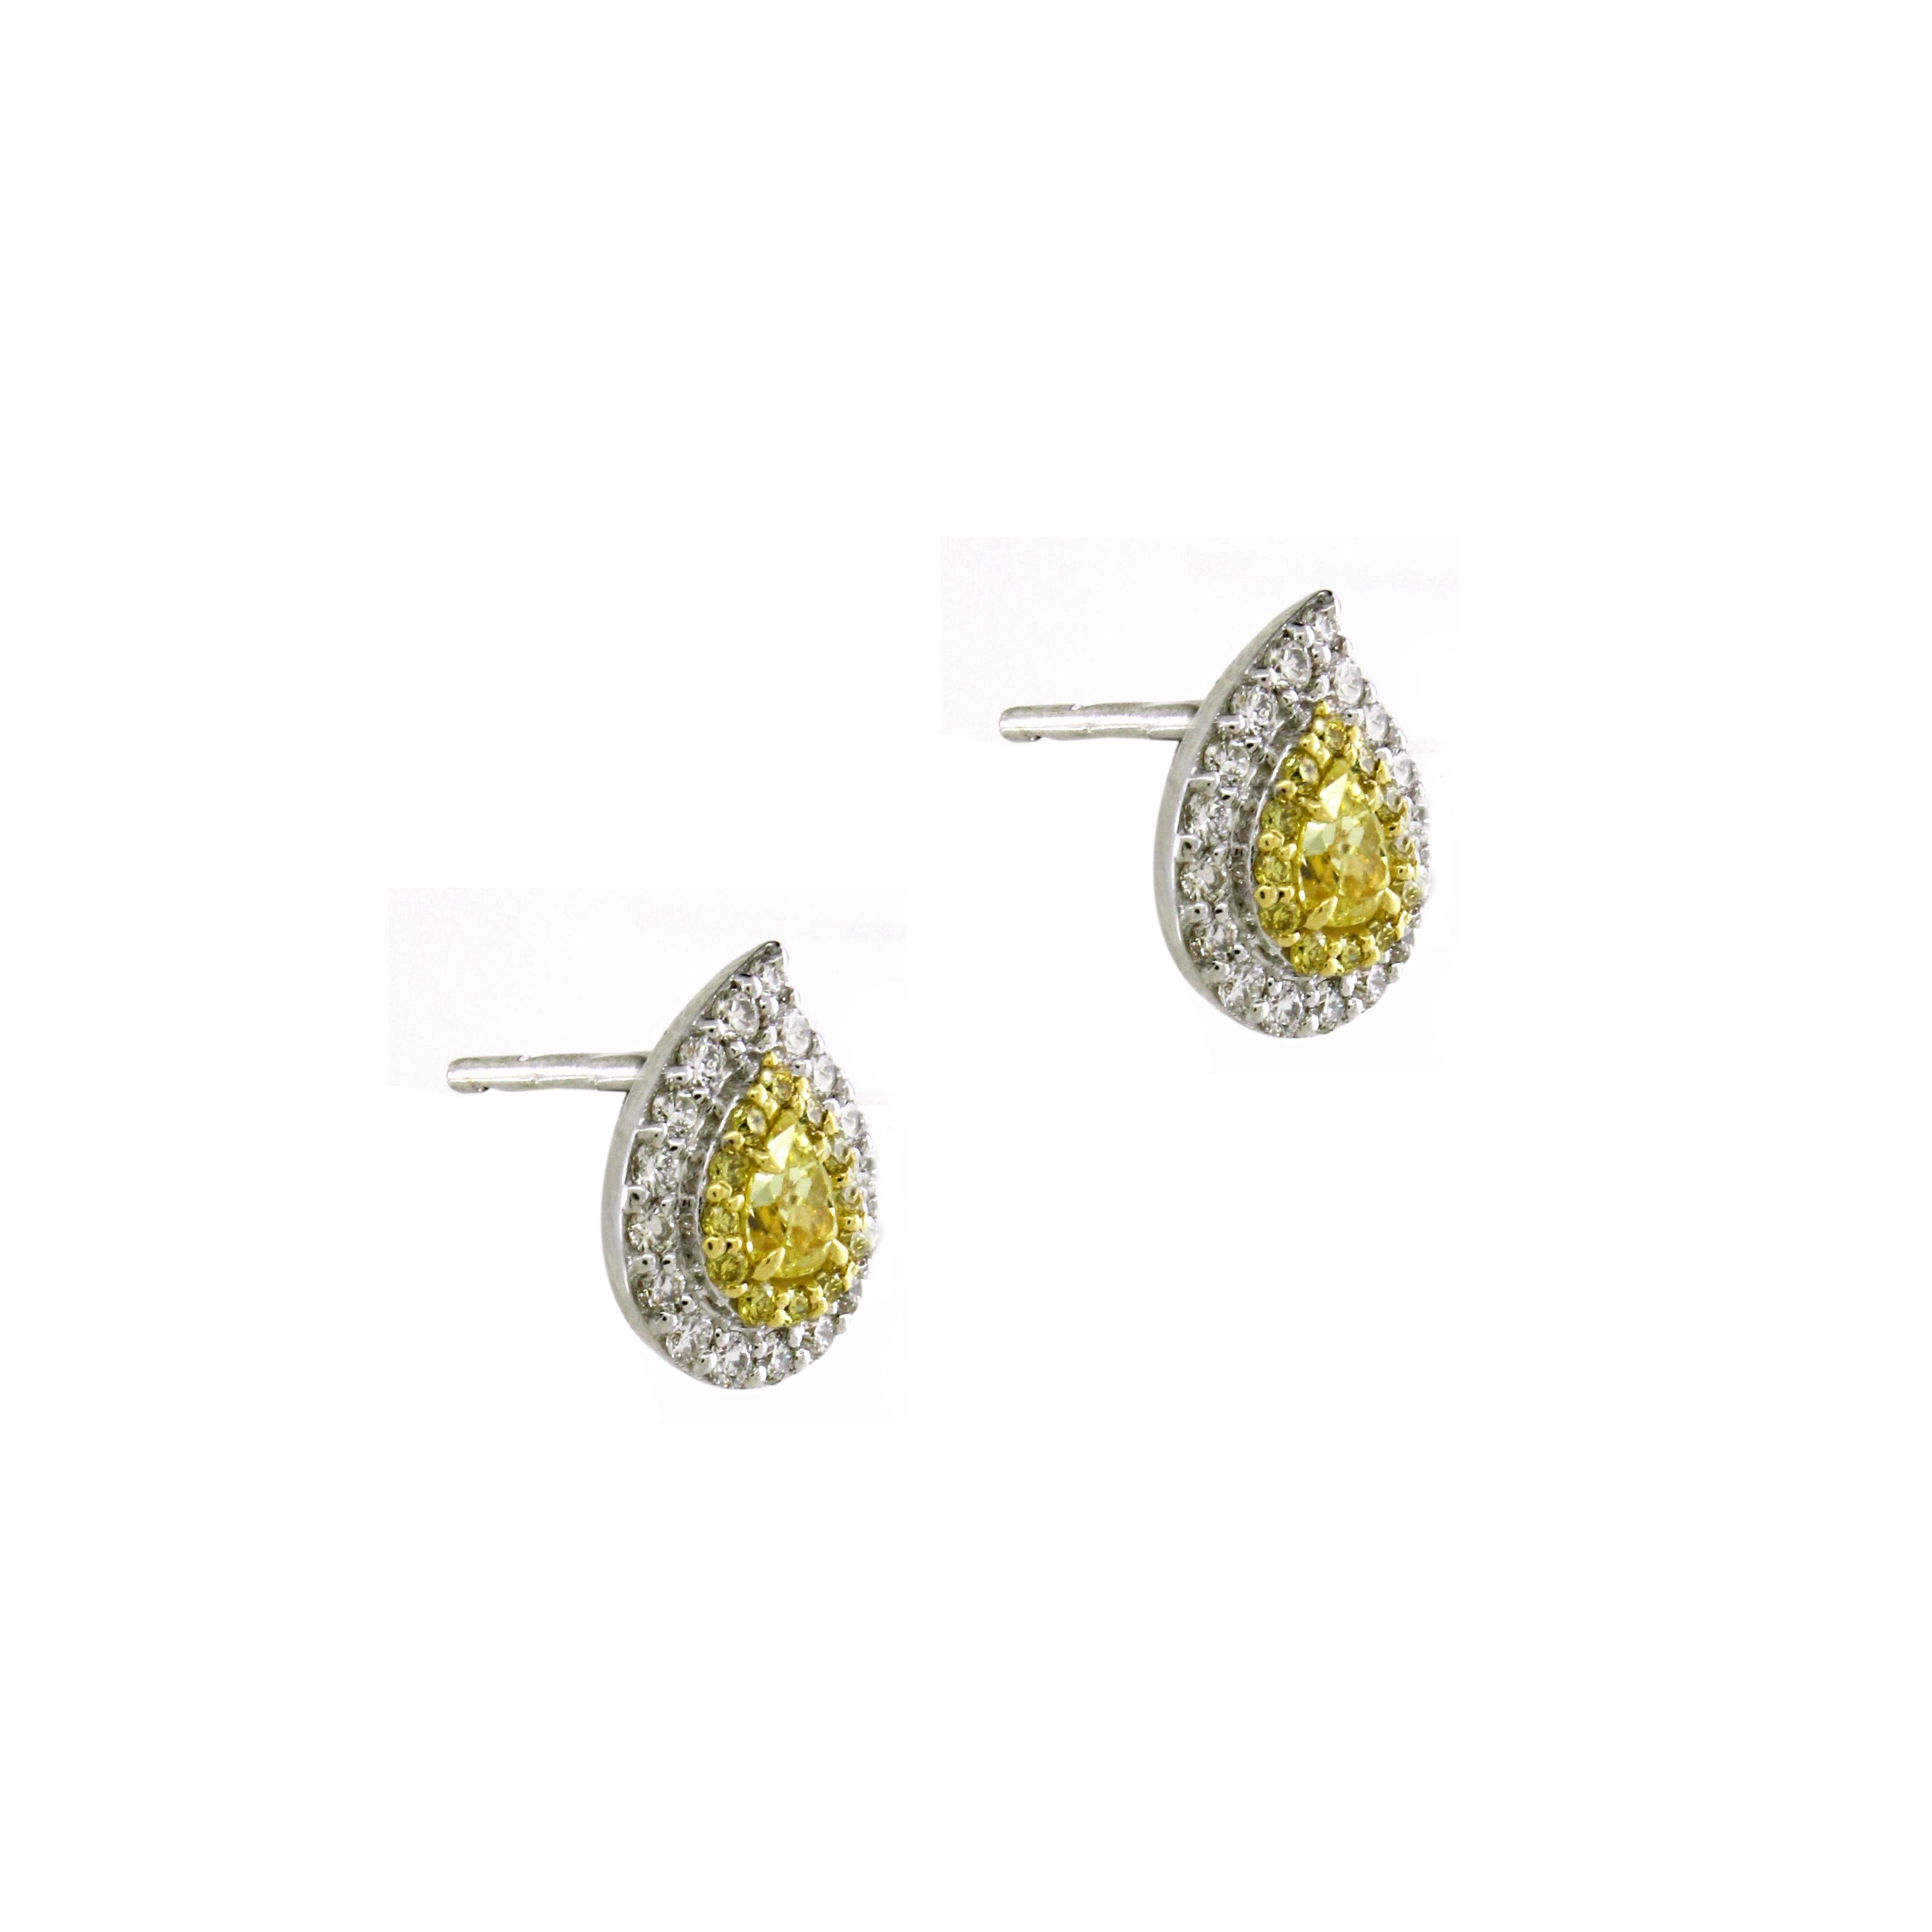 Each earring boasts a central pear-shaped yellow diamond, with a combined weight of 0.35 carats. 
Surrounding each pear yellow diamond is a dazzling halo of 24 round yellow diamonds, totaling 0.14 carats. The outer halo comprises 34 round white